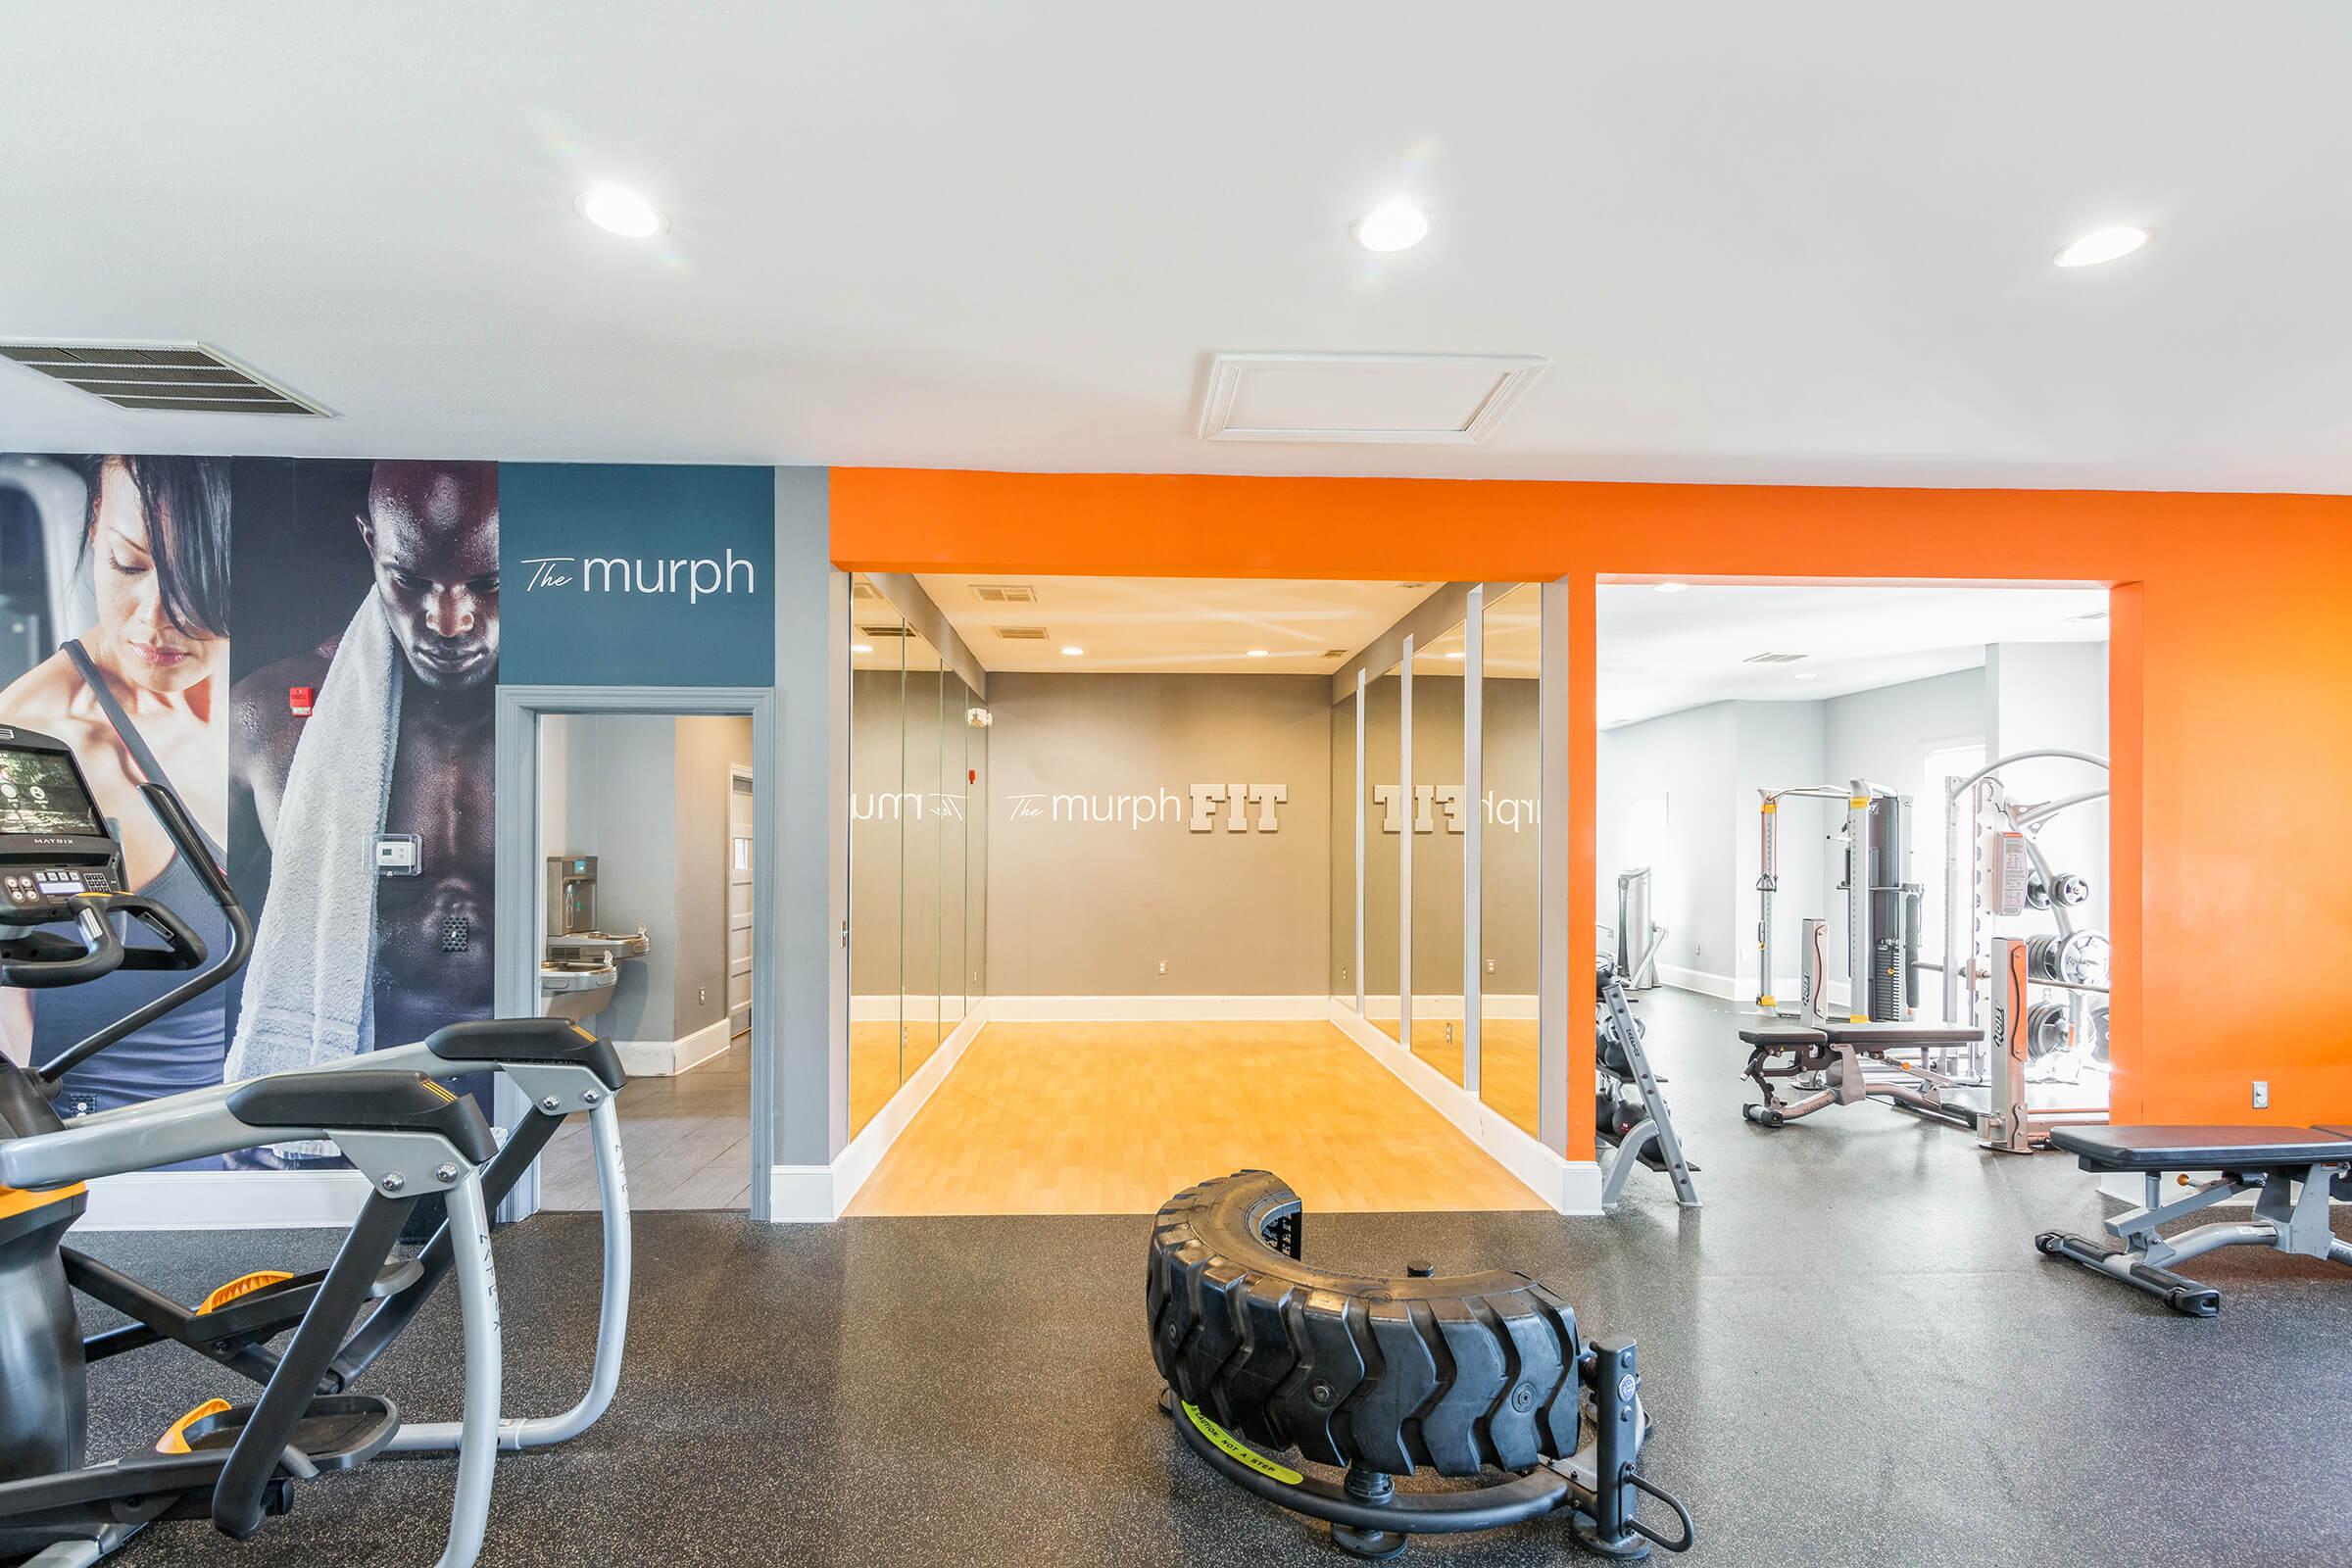 Free weights available at The Murph